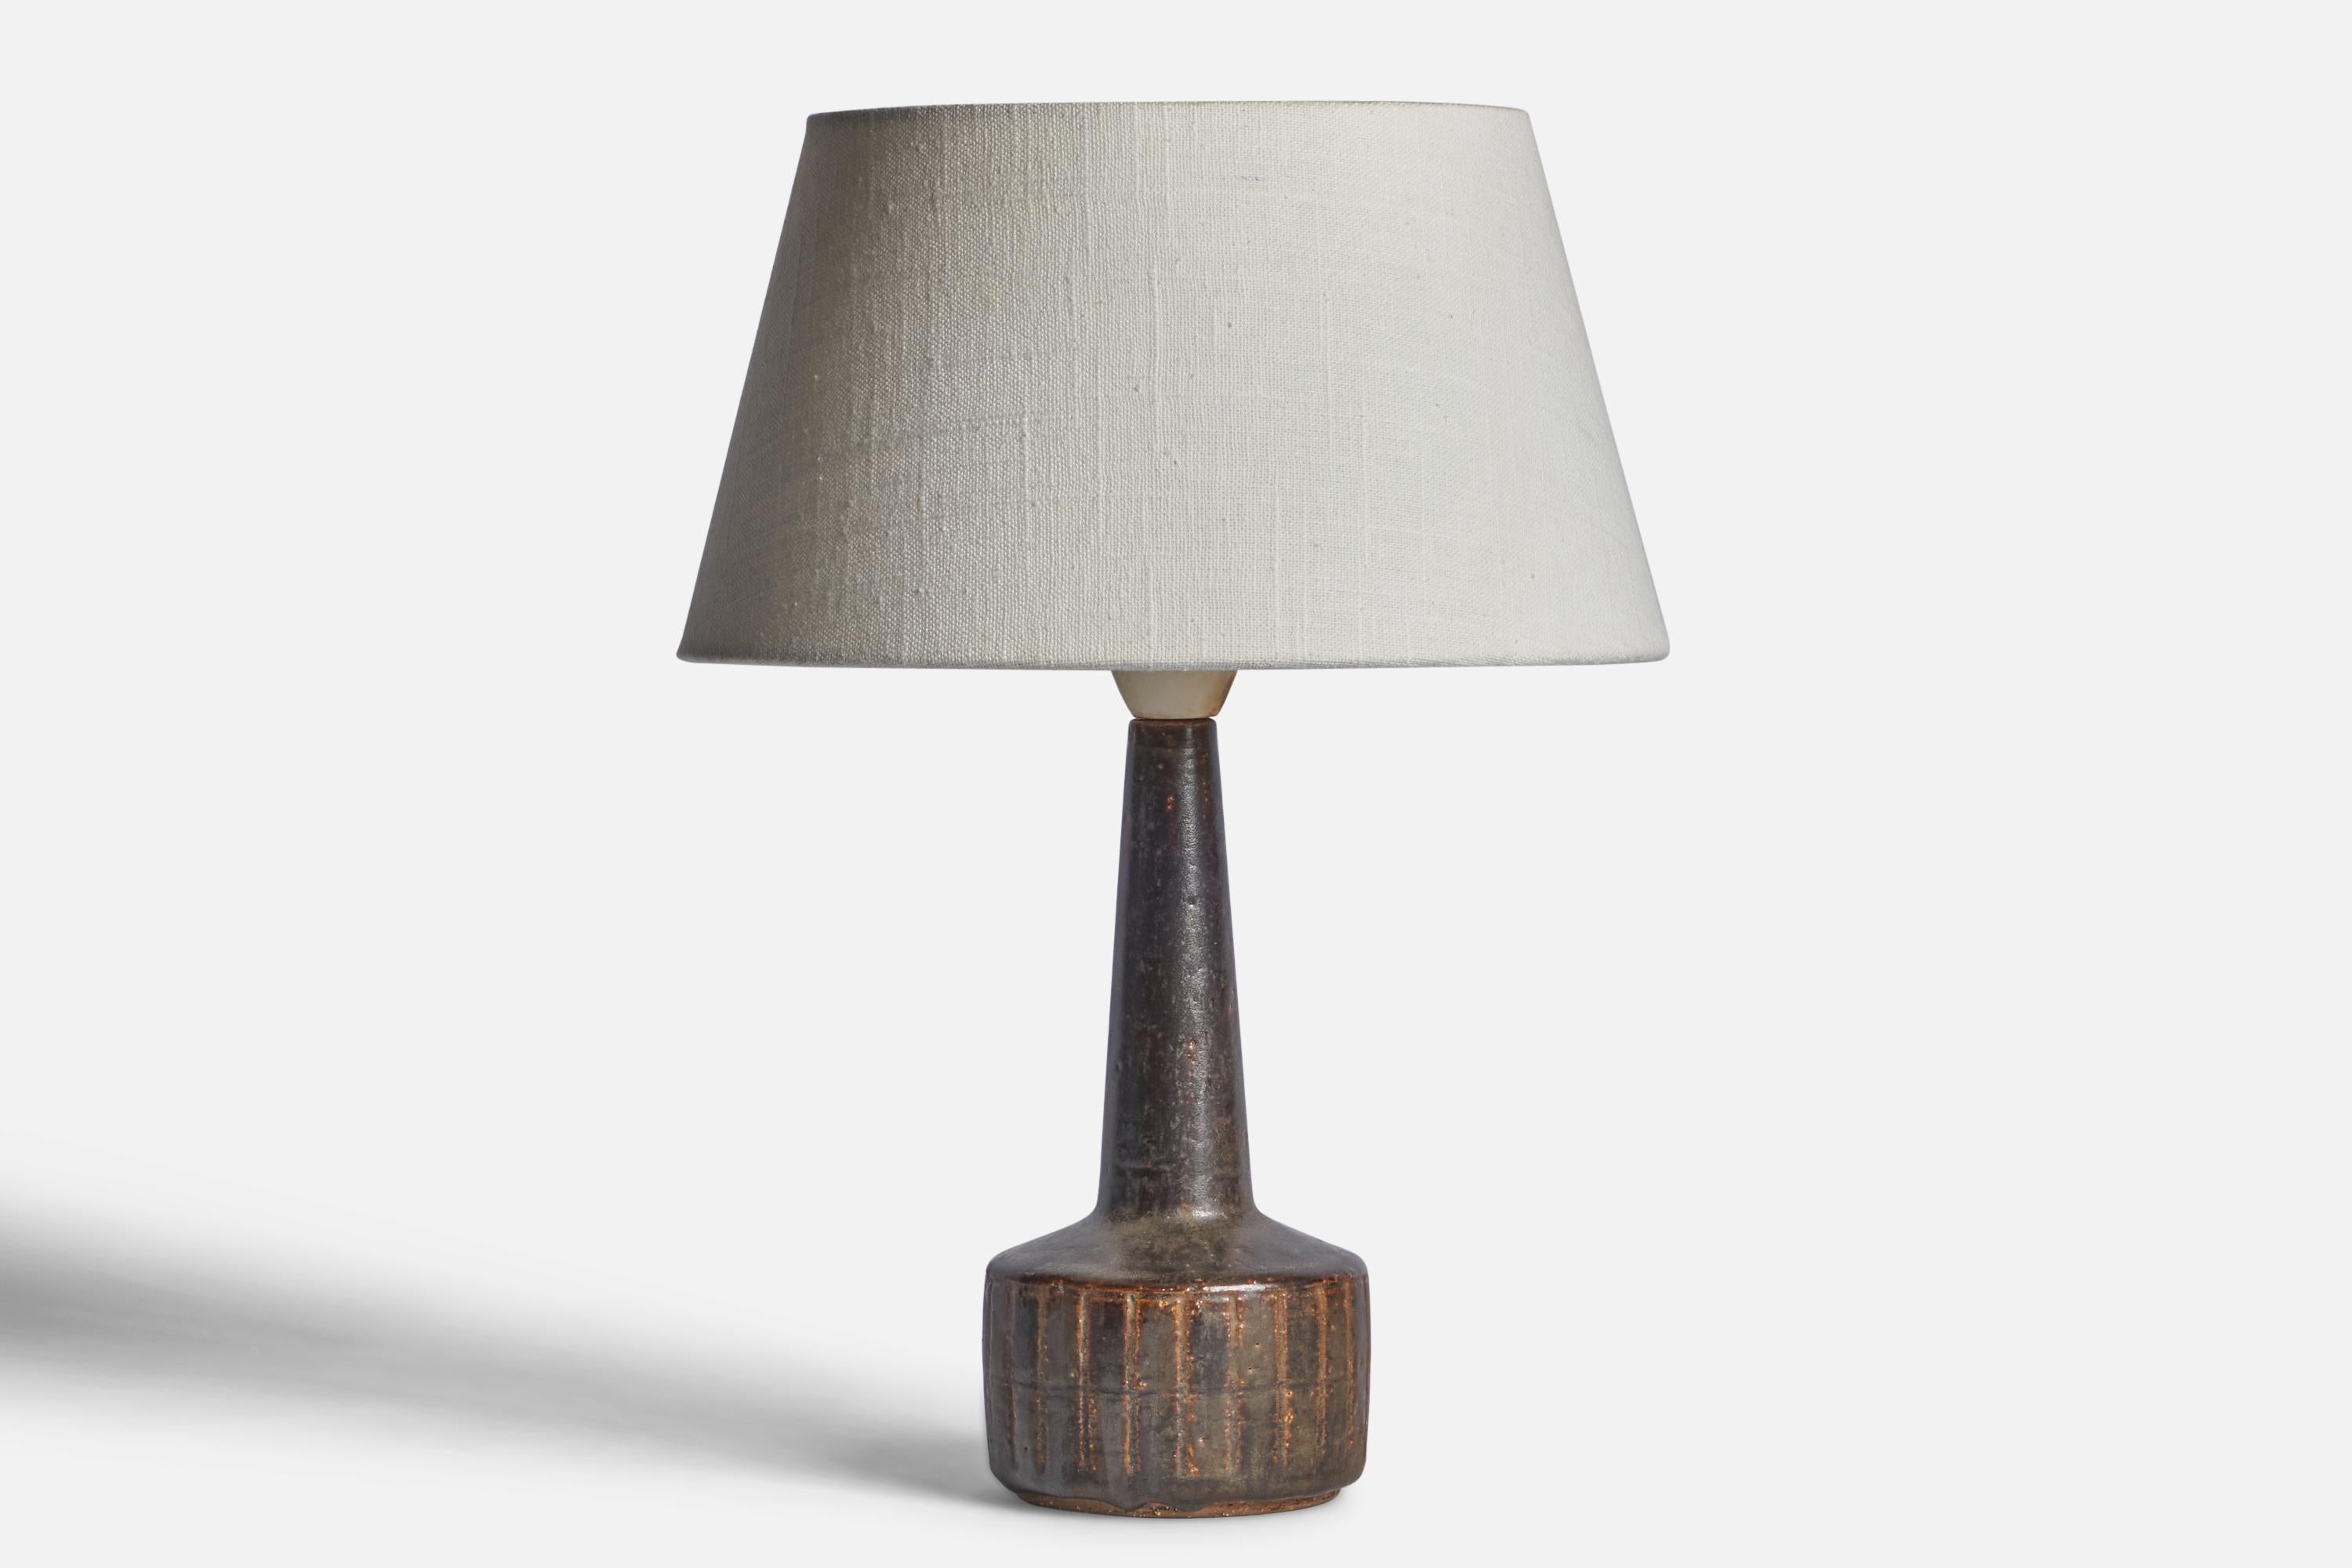 A brown-glazed stoneware table lamp designed by Per & Annelise Linneman-Schmidt and produced by Palshus, Denmark, 1960s.

Dimensions of Lamp (inches): 10.85” H x 4” Diameter
Dimensions of Shade (inches): 7” Top Diameter x 10” Bottom Diameter x